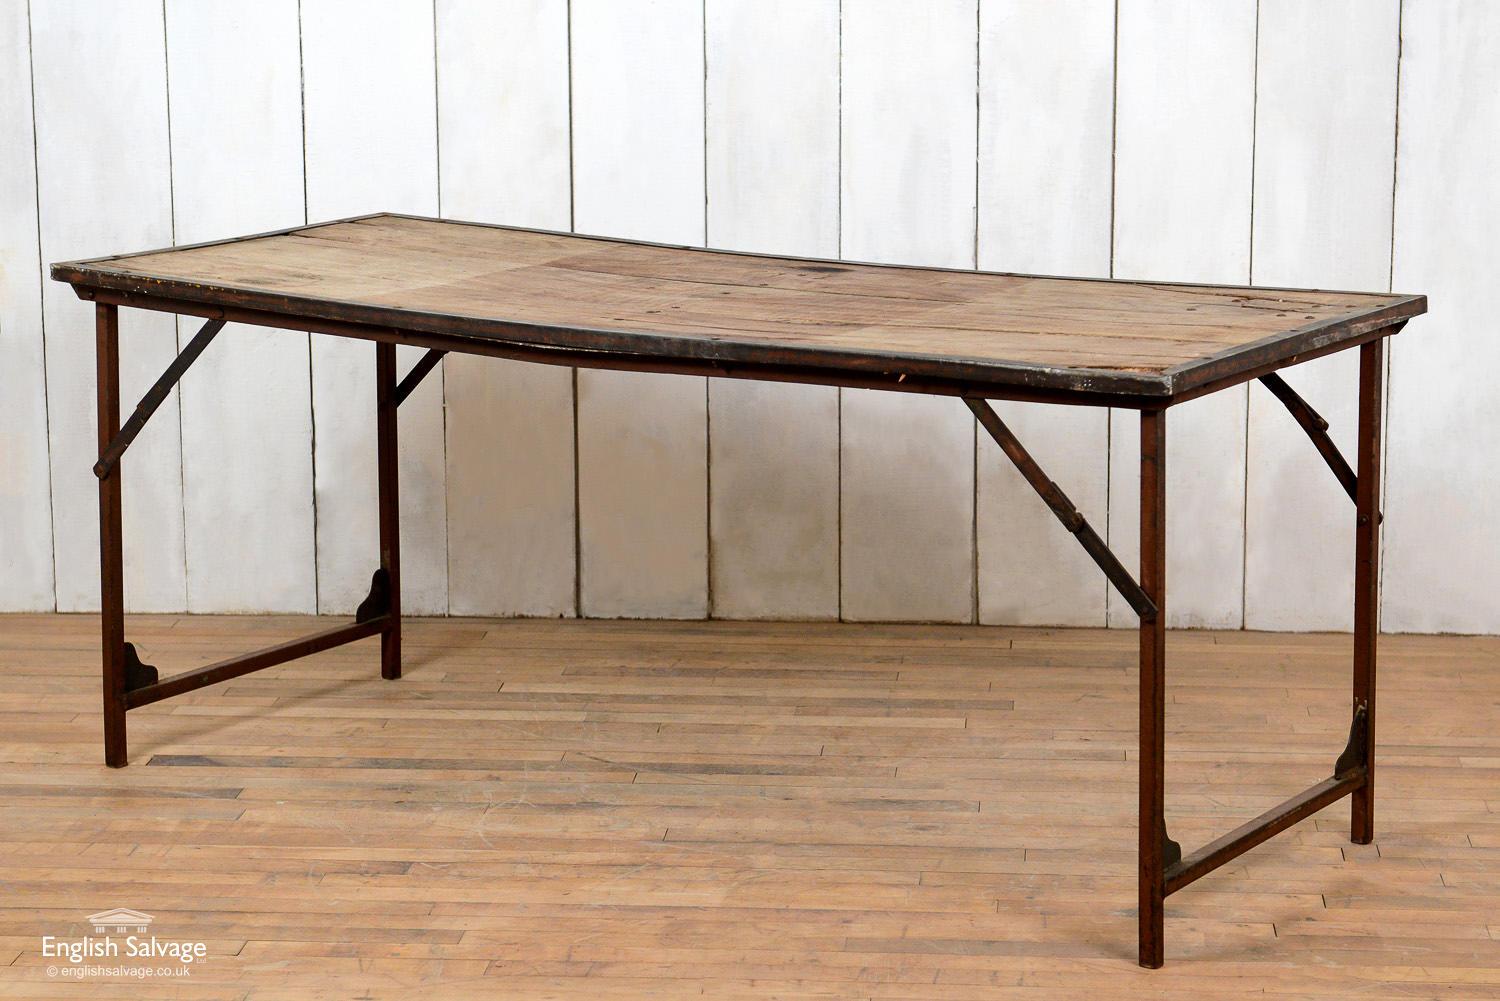 Reclaimed iron and hardwood folding table. Beautiful rustic patina to the wood with some splits and knots. Slight bow to the table and one corner missing some wood.